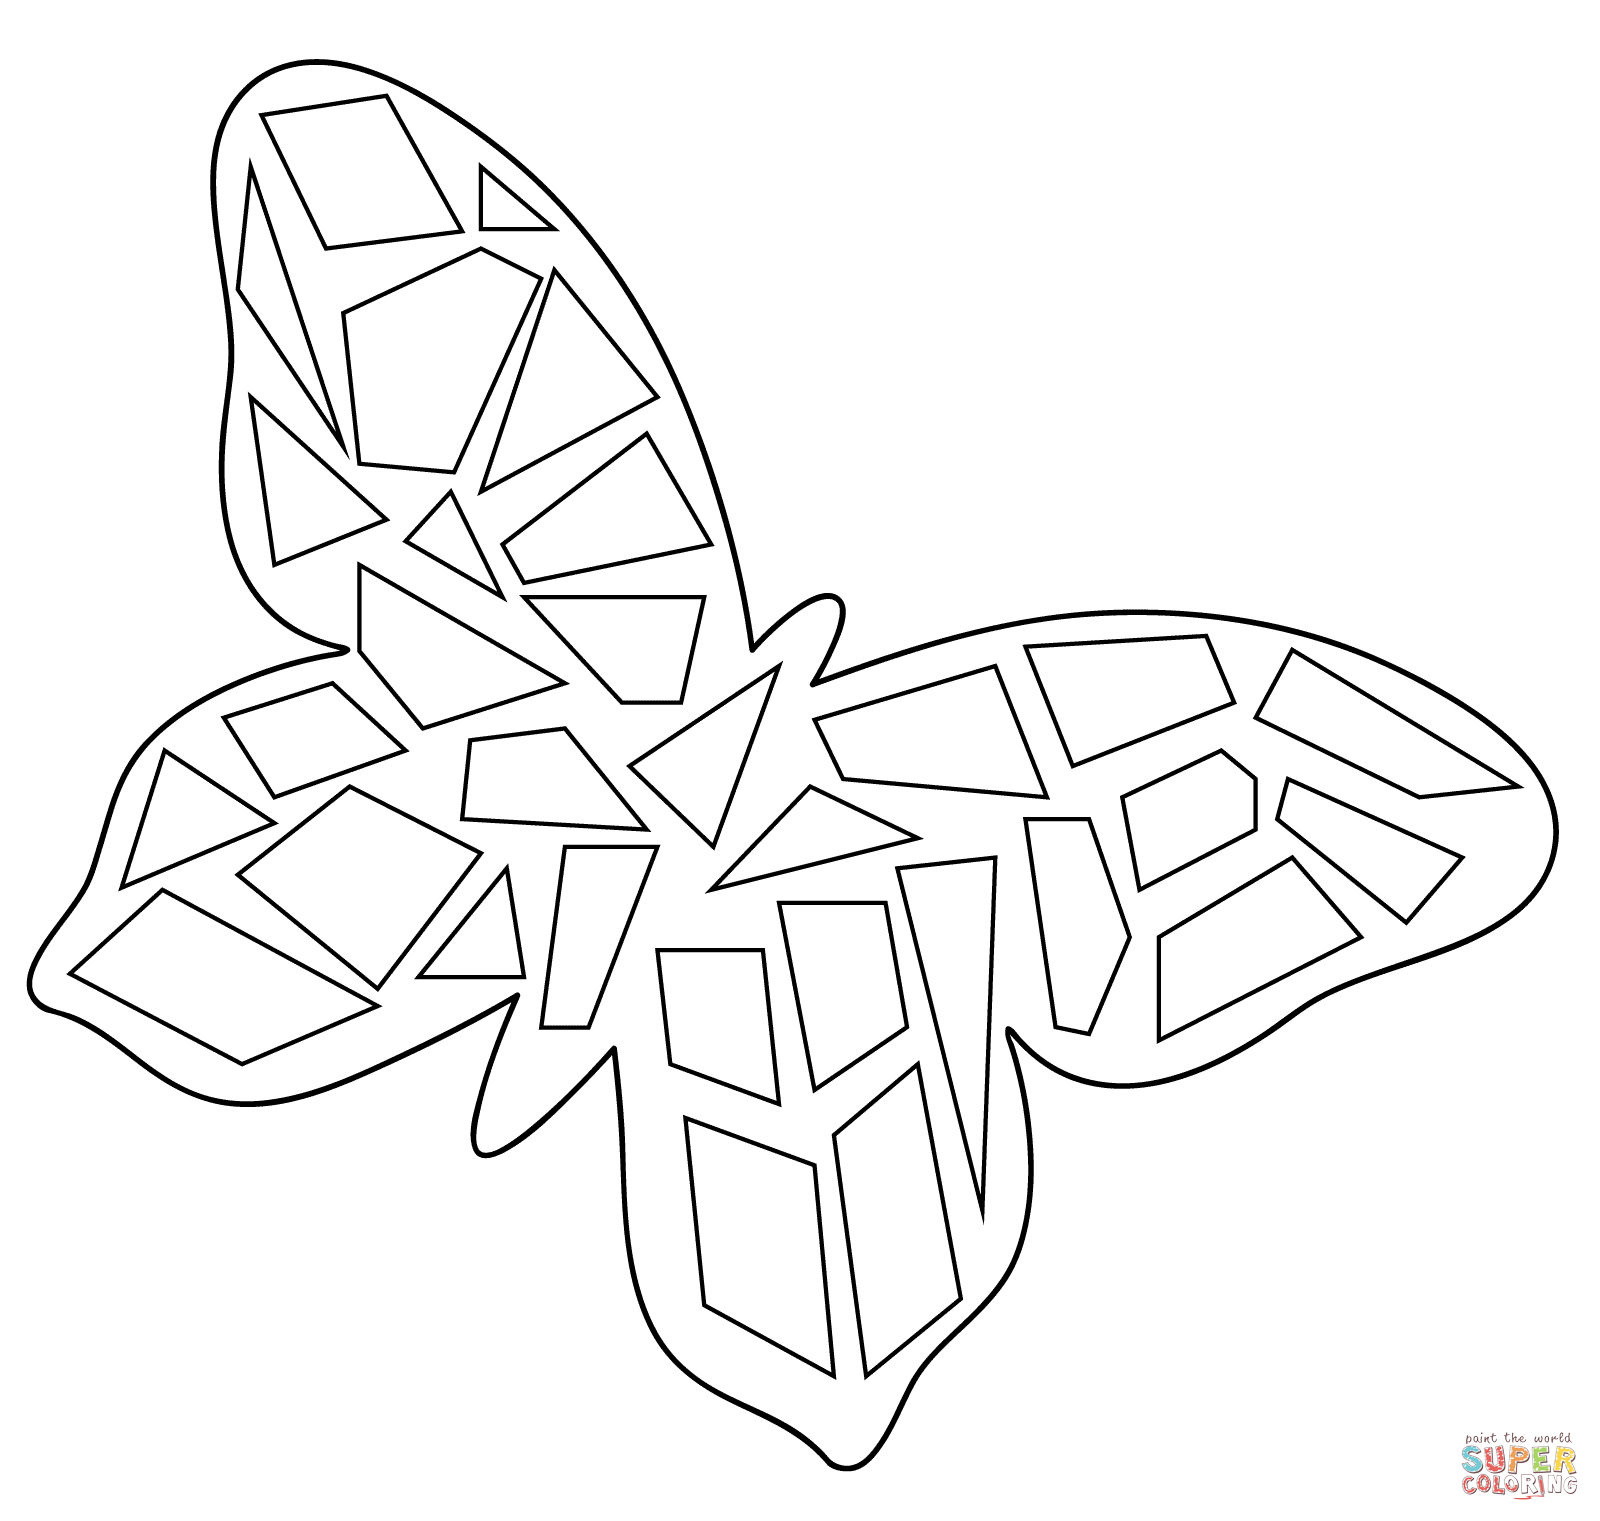 coloring-pages-mosaic-patterns-beginner-coloring-pages